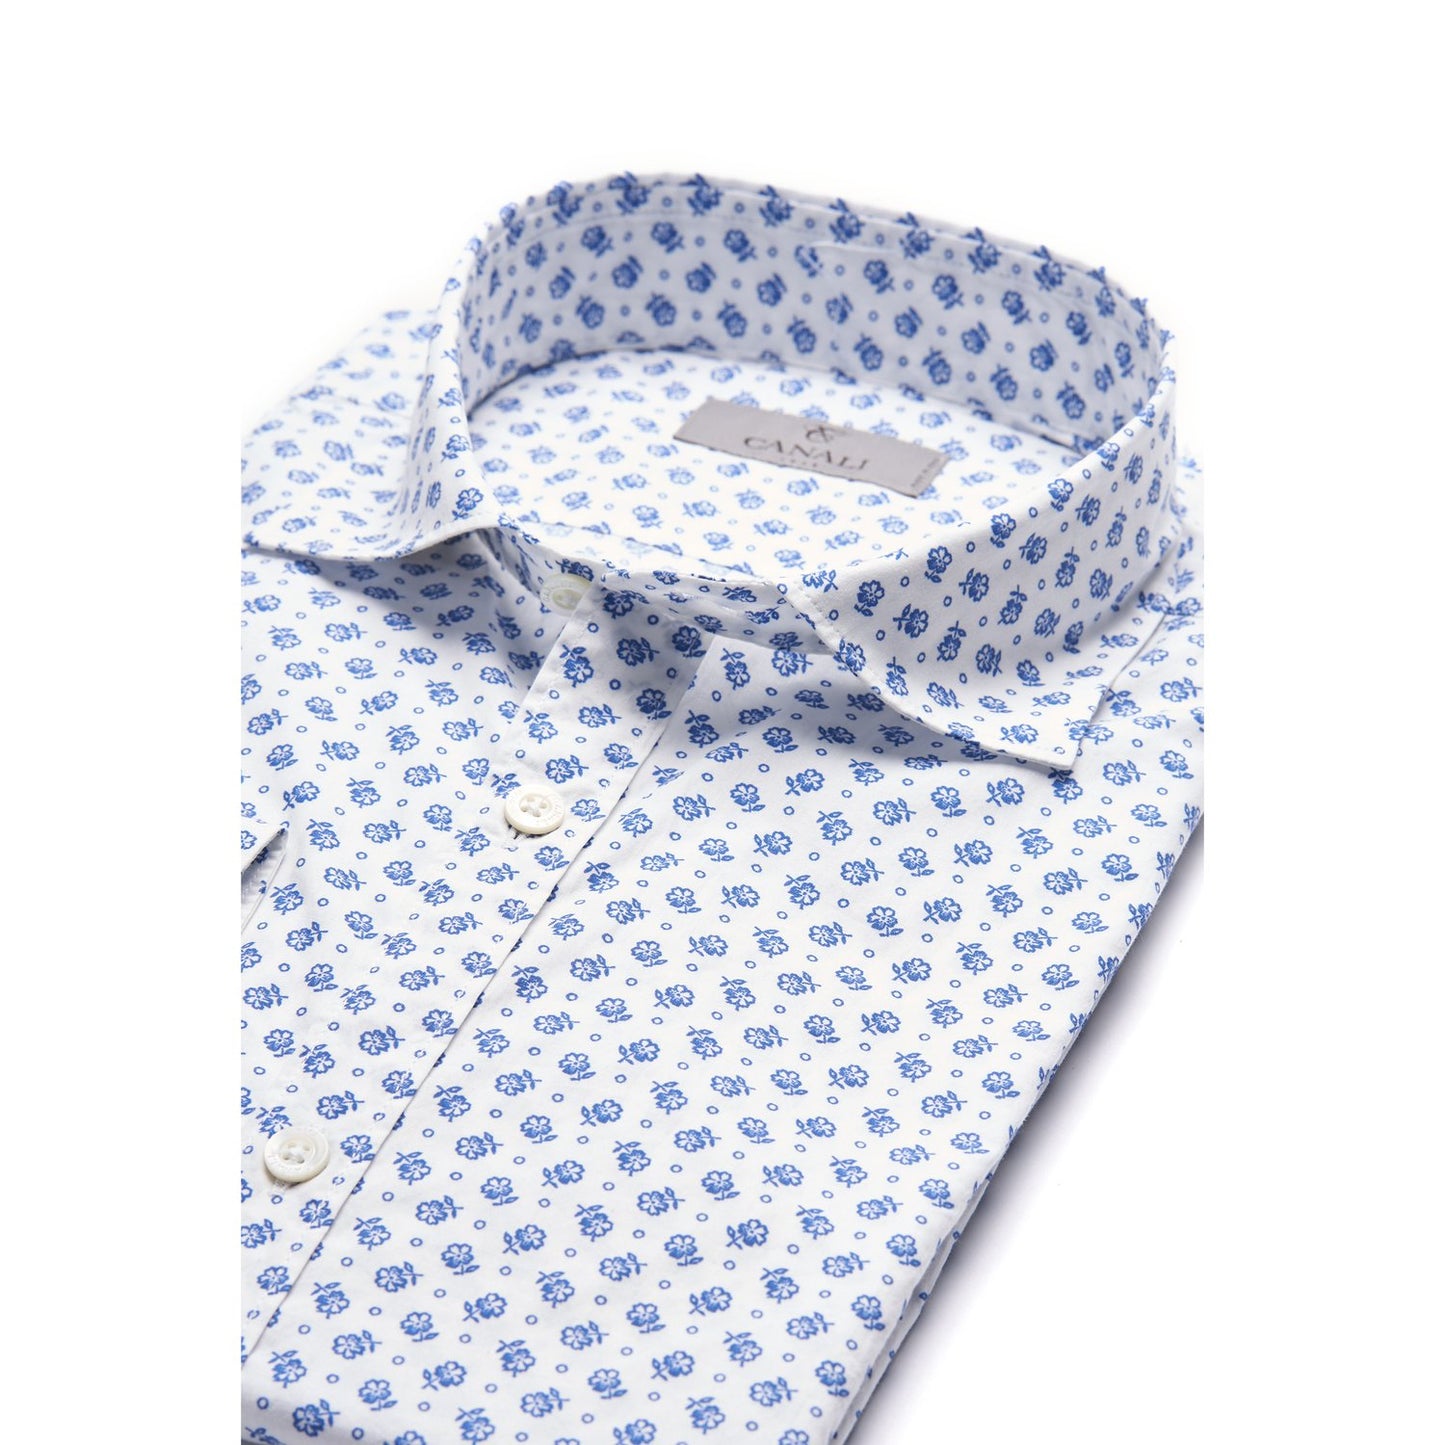 Canali Modern Fit Cotton Sport Shirt in White with Blue Floral Pattern